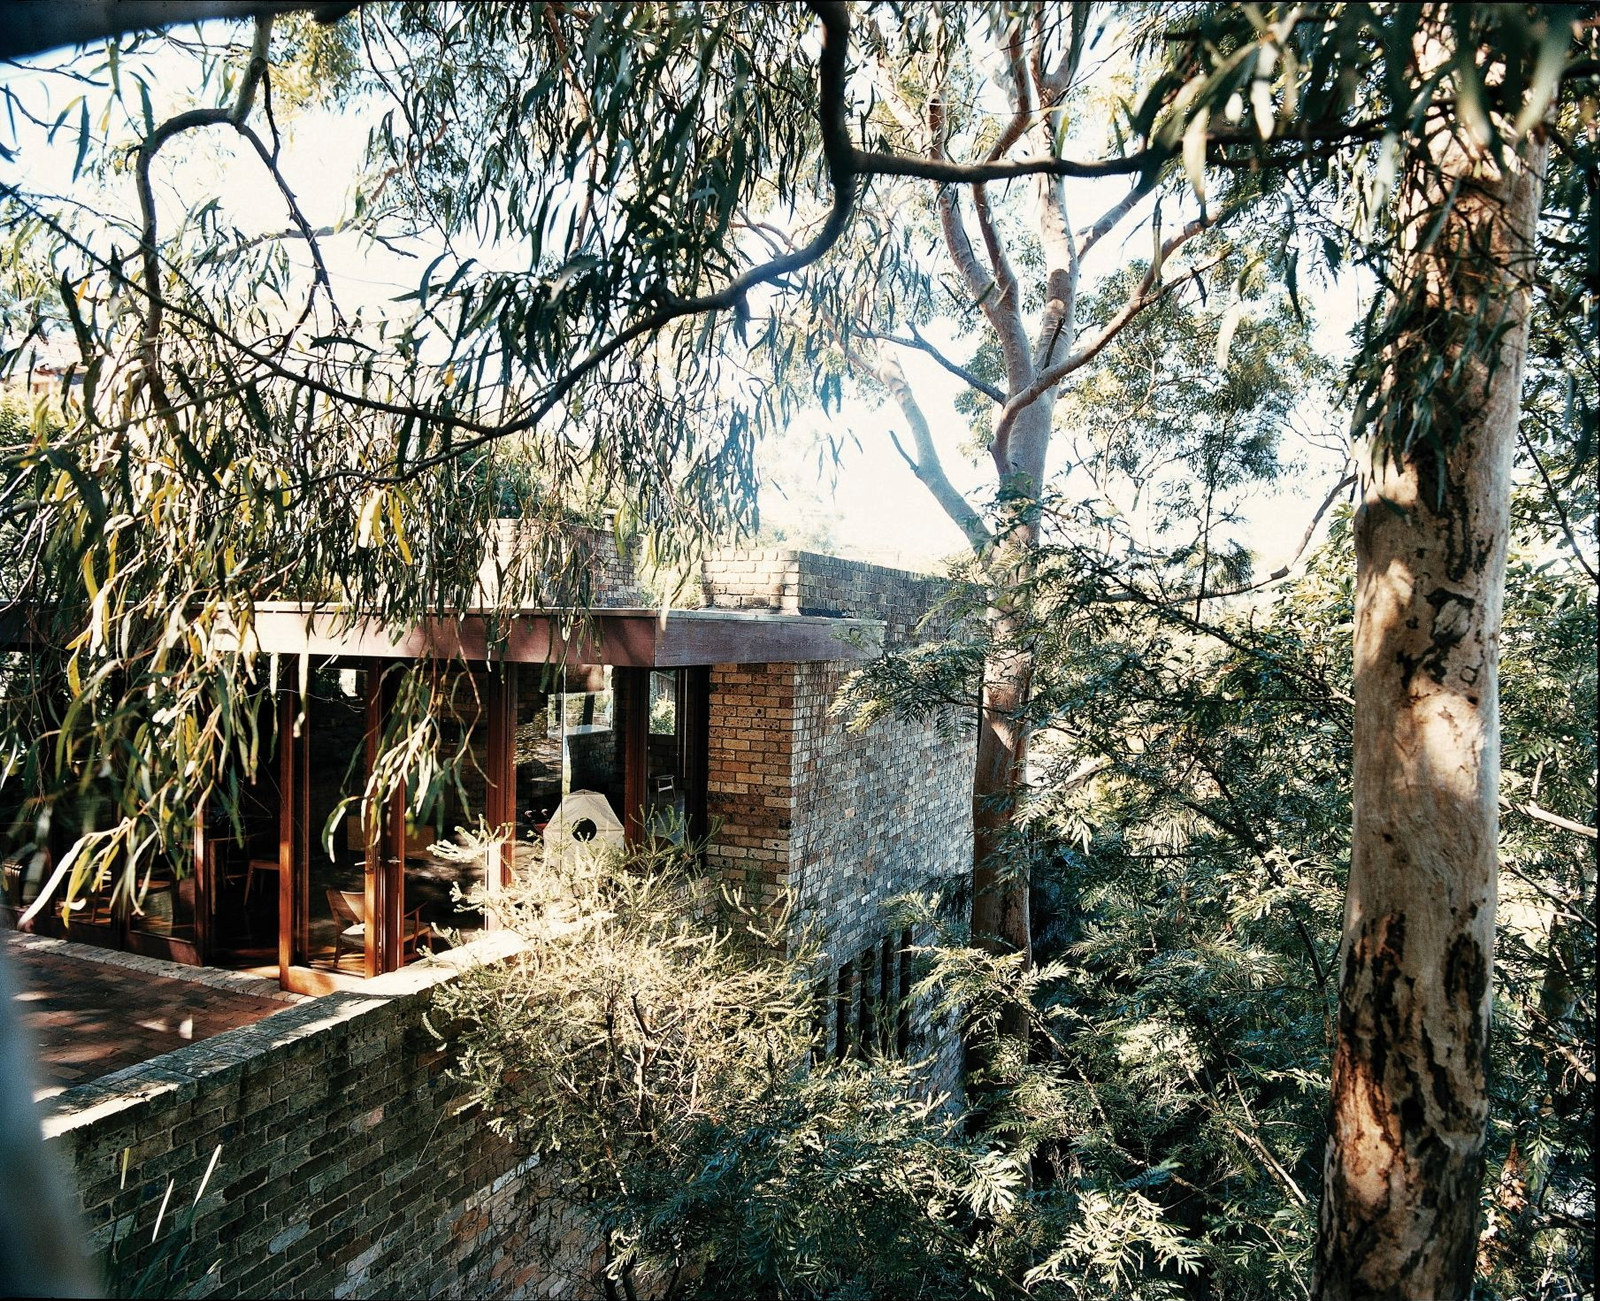 This is a photograph of a light brick house set amongst native trees